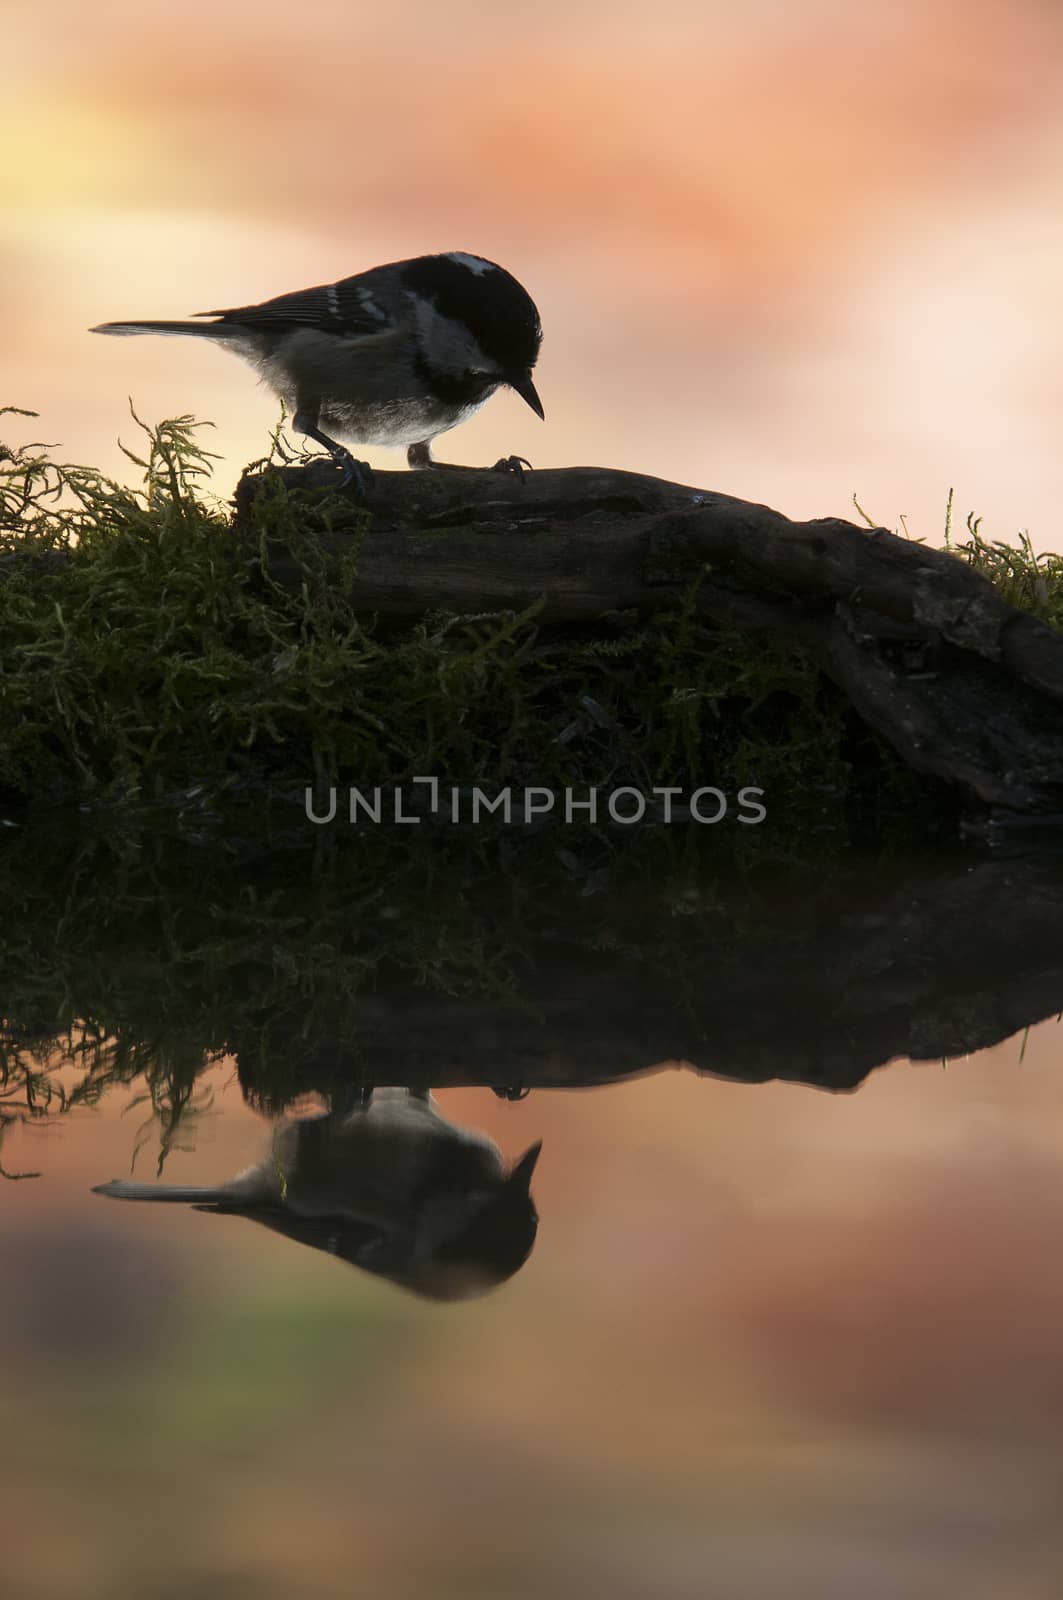 Coal tit (Periparus ater), Backlight and bird reflection by jalonsohu@gmail.com